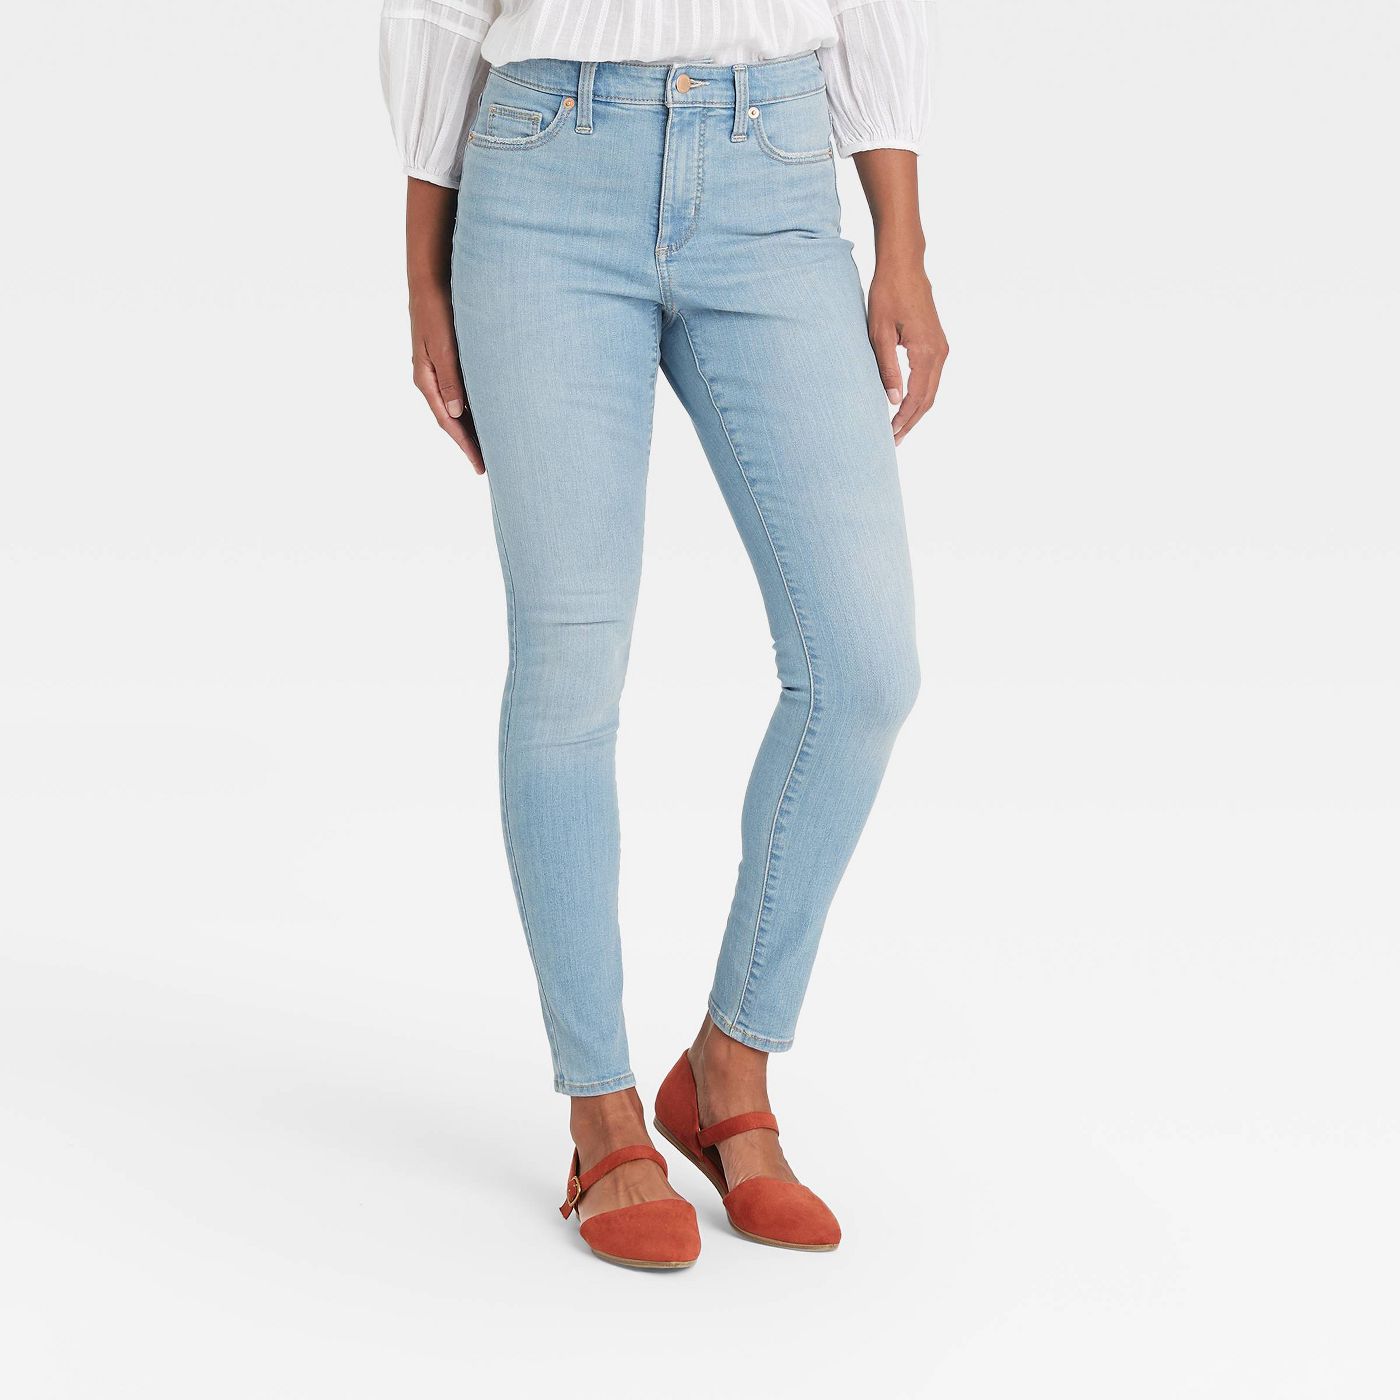 Women's High-Rise Skinny Jeans - Universal Thread™ - image 1 of 11